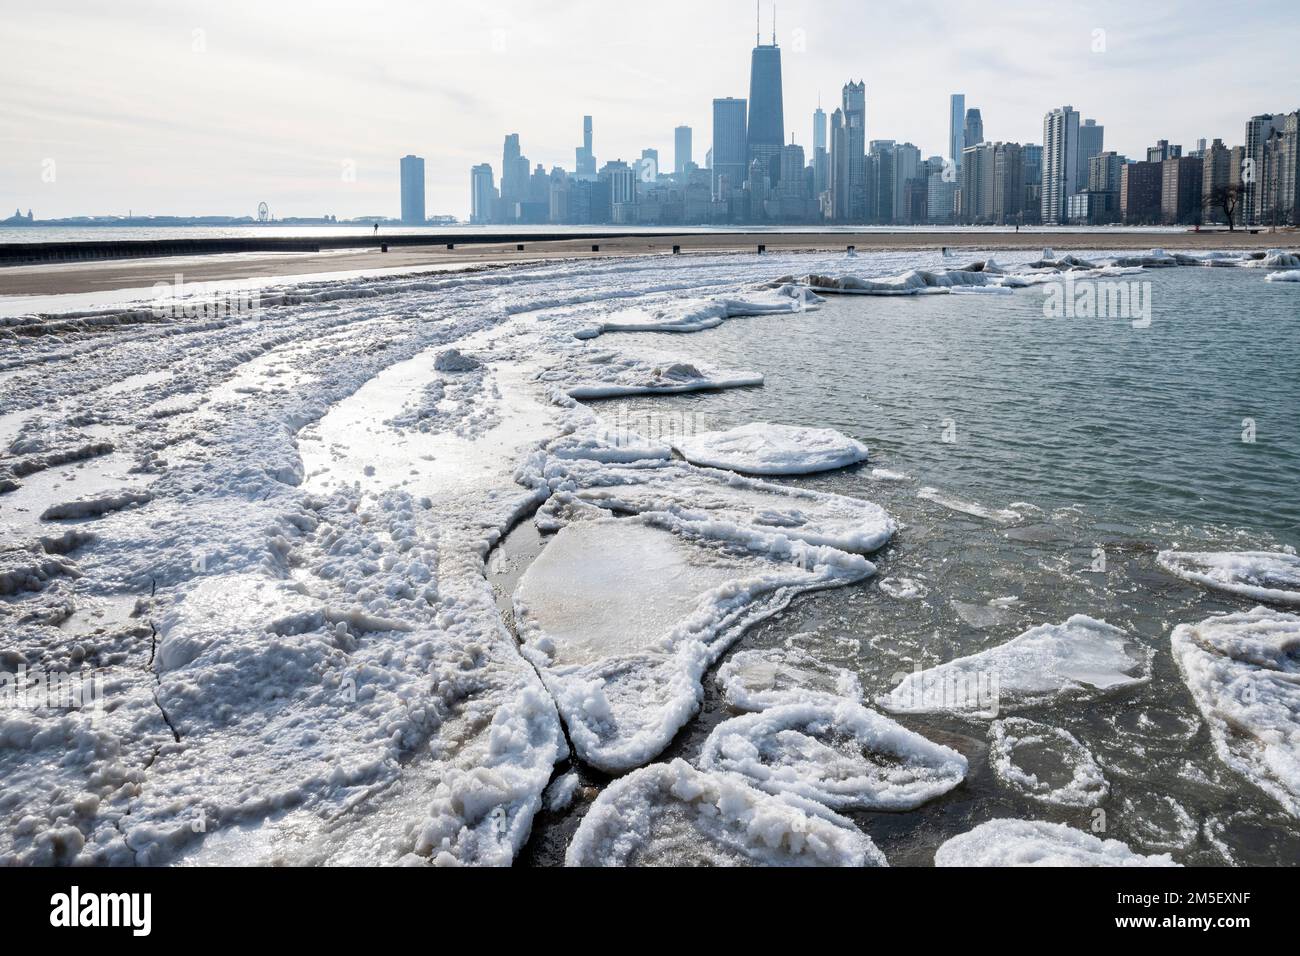 Chicago, USA.  28 December 2022.  Chicago weather - Pancake ice lingers on the shores of Lake Michigan following heavy snow and what was termed a ‘bomb cyclone’ which has affected large parts of the country with freezing temperatures.  The forecast for Chicago is for warmer, above-zero conditions for the next ten days. Credit: Stephen Chung / Alamy Live News Stock Photo